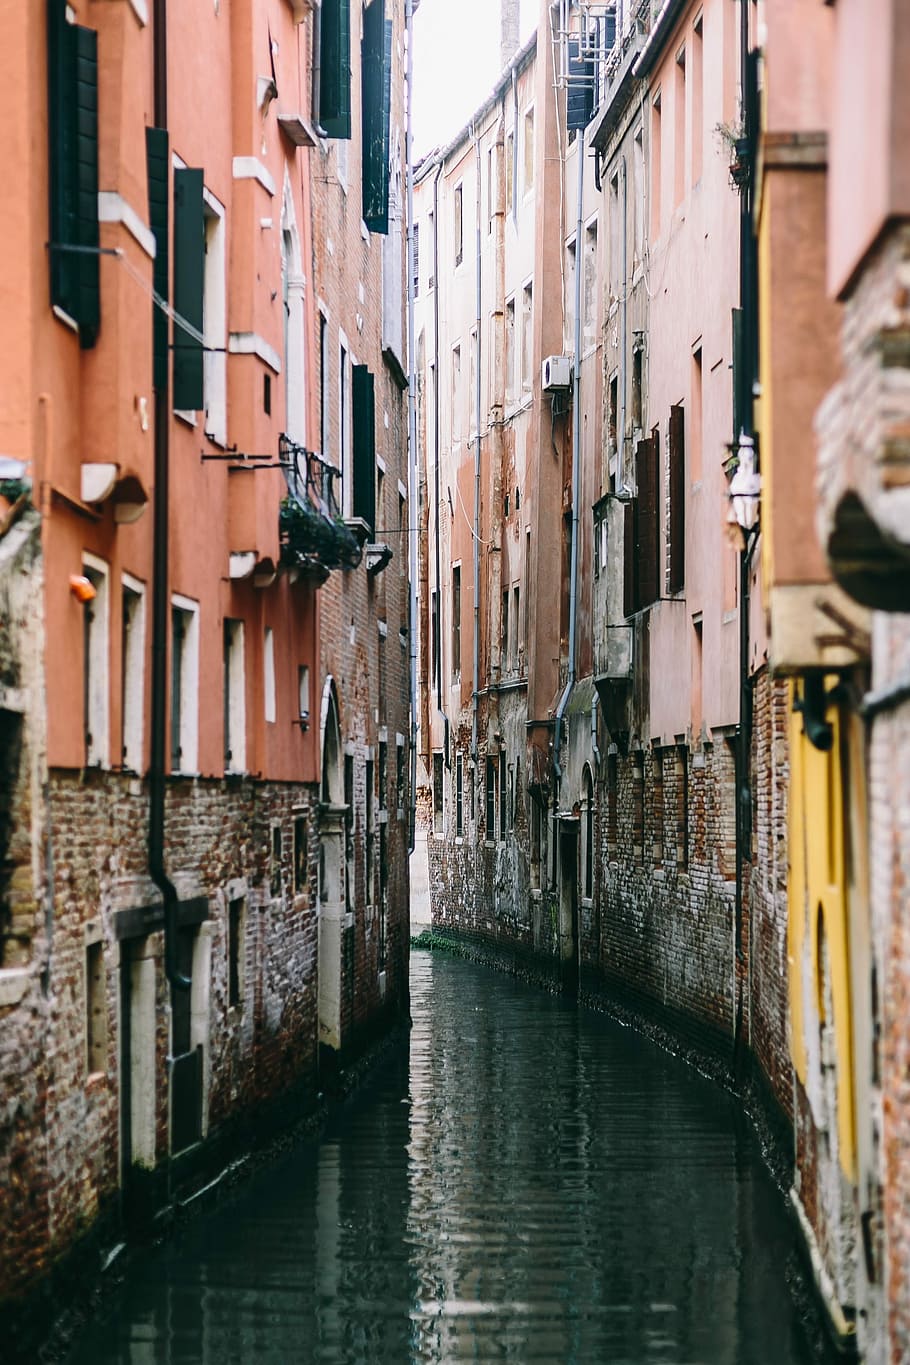 A Trip to Venice, Italy, vacations, architecture, buildings, old town